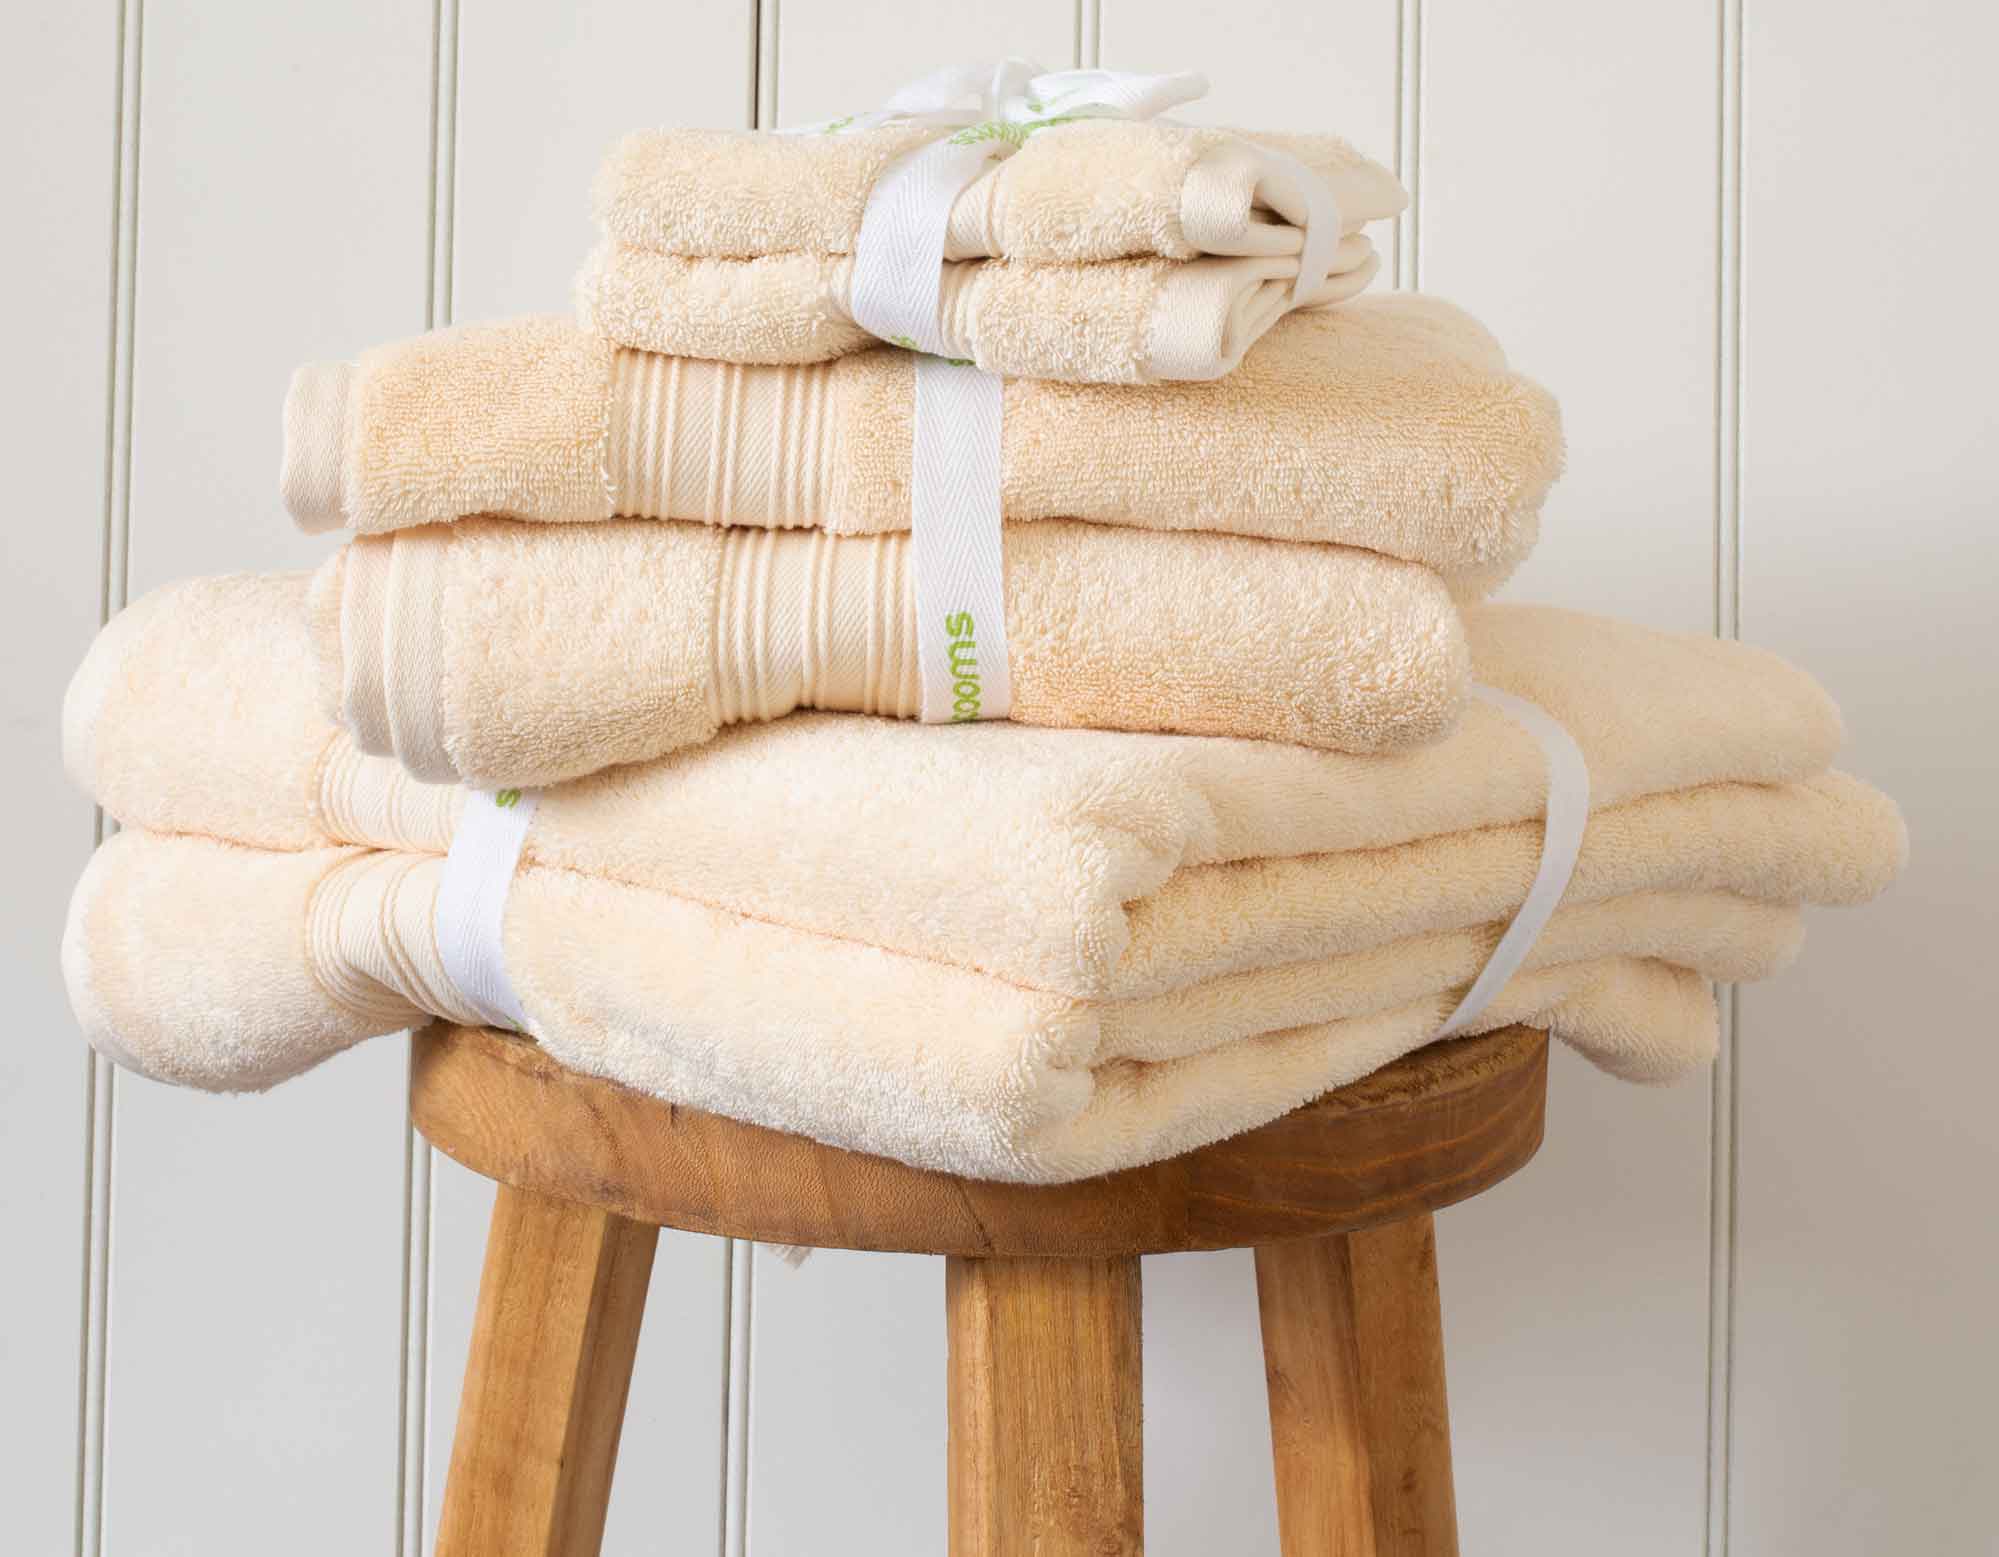 Creme Egyptian cotton face cloths and towels in pile